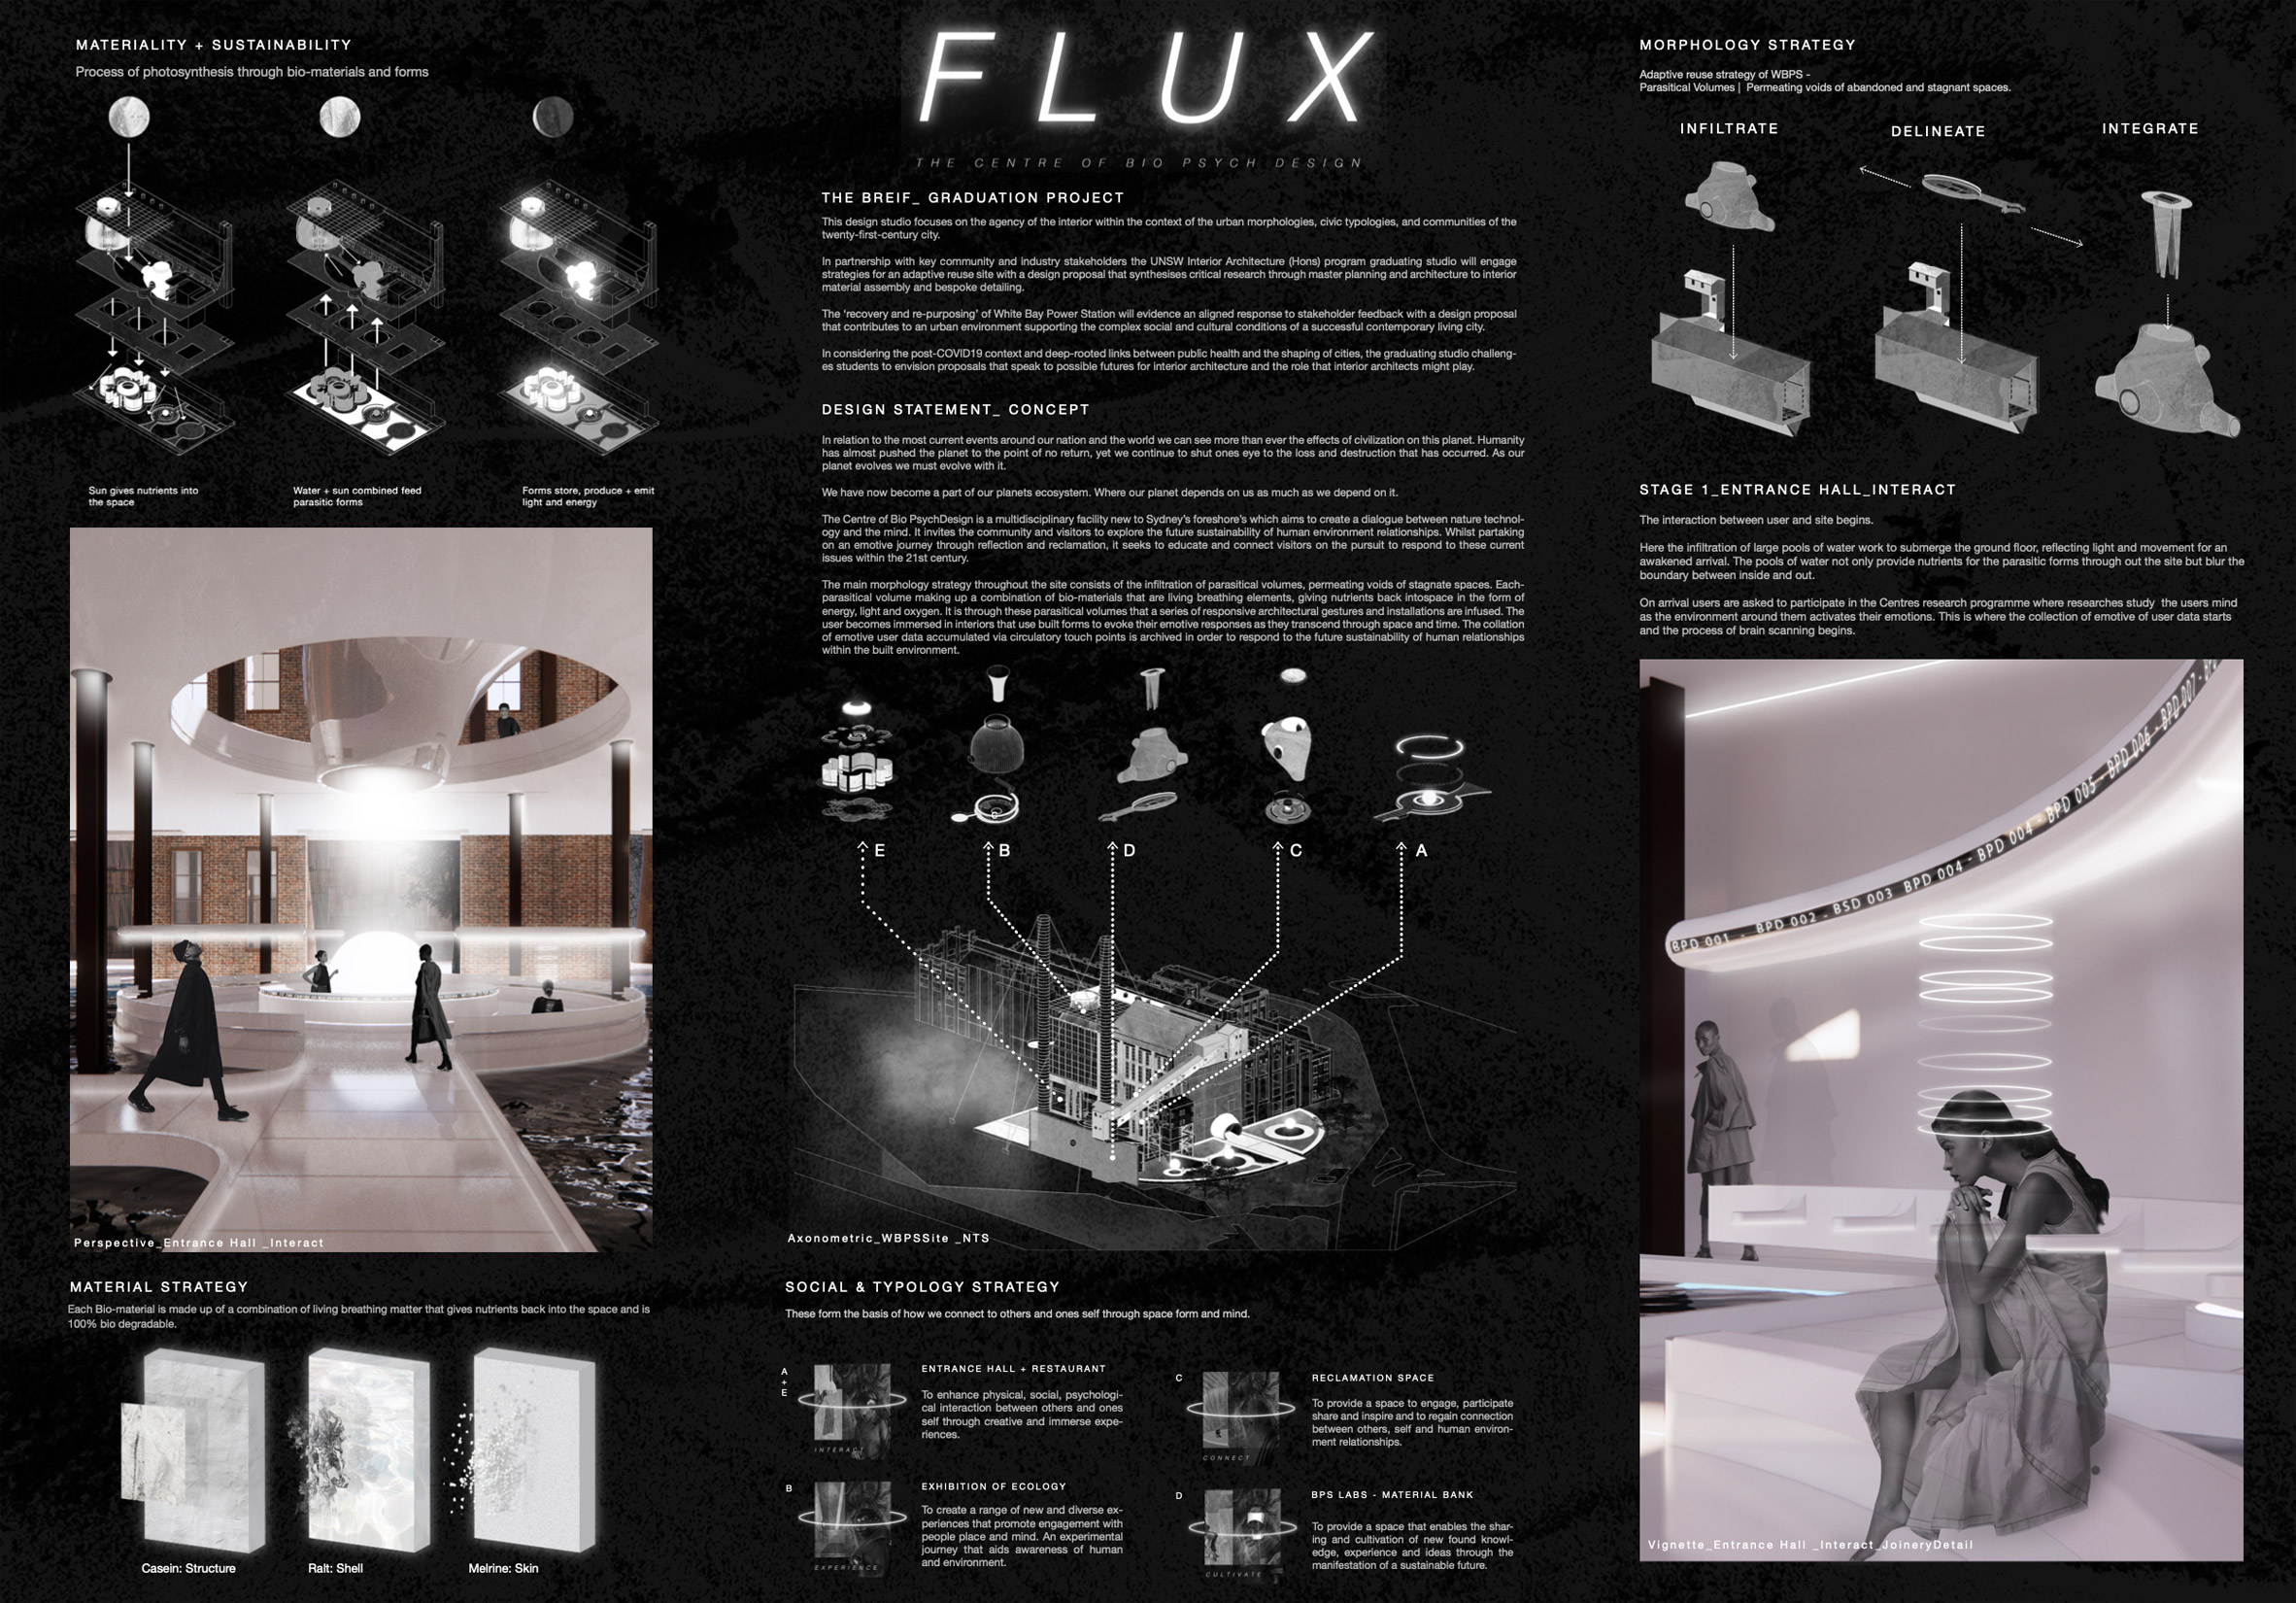 A photograph of FLUX – The Centre of Bio Psych Design